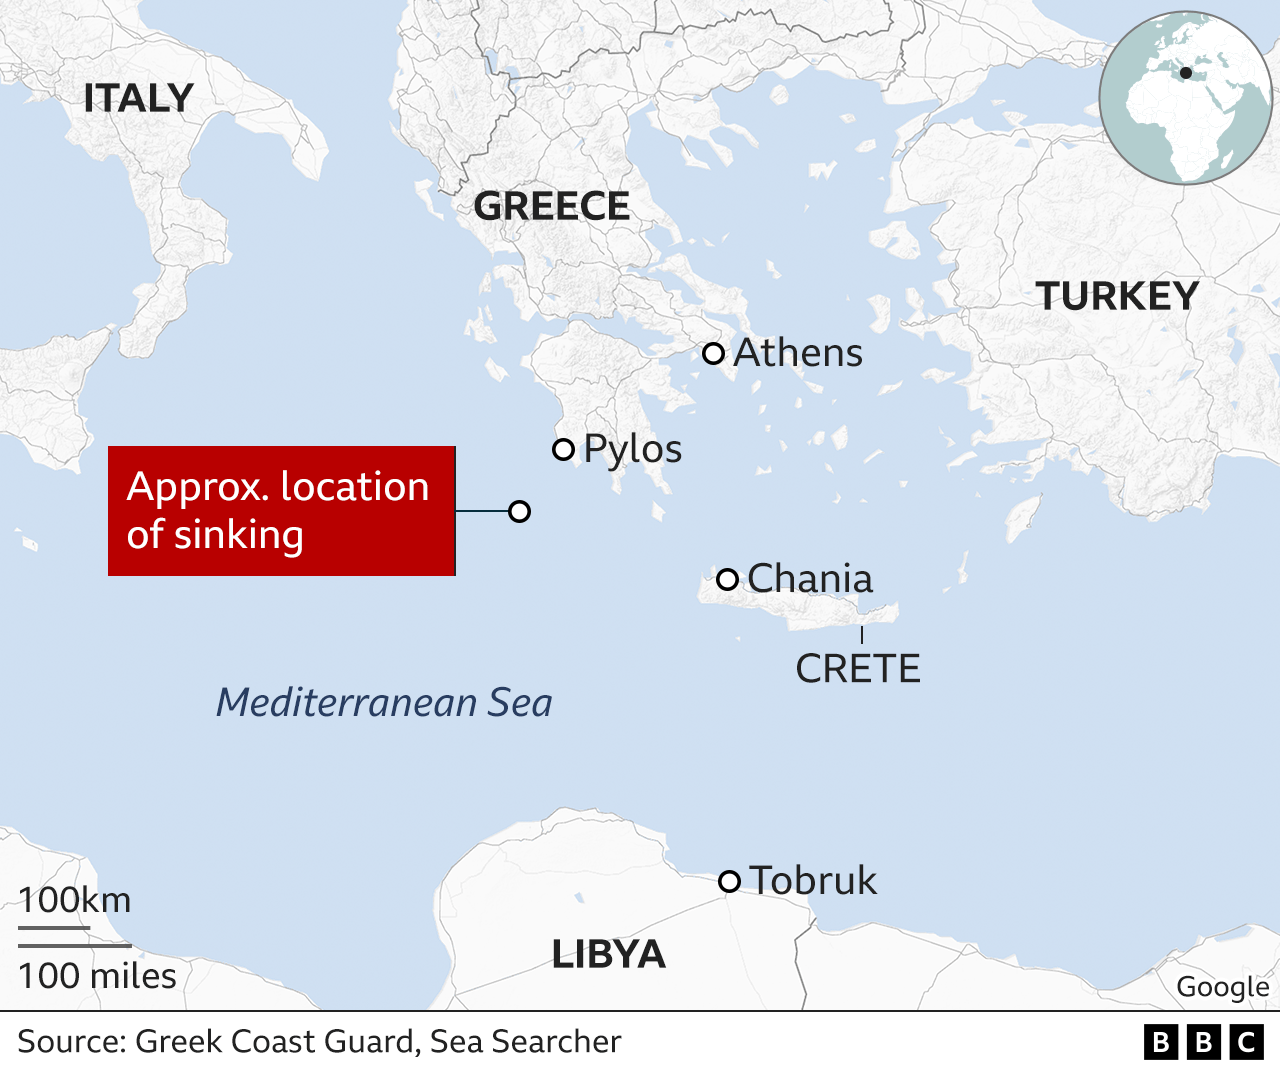 A BBC map shows the approximate location of sinking of a migrant boat off the coast of the Greek island of Pylos